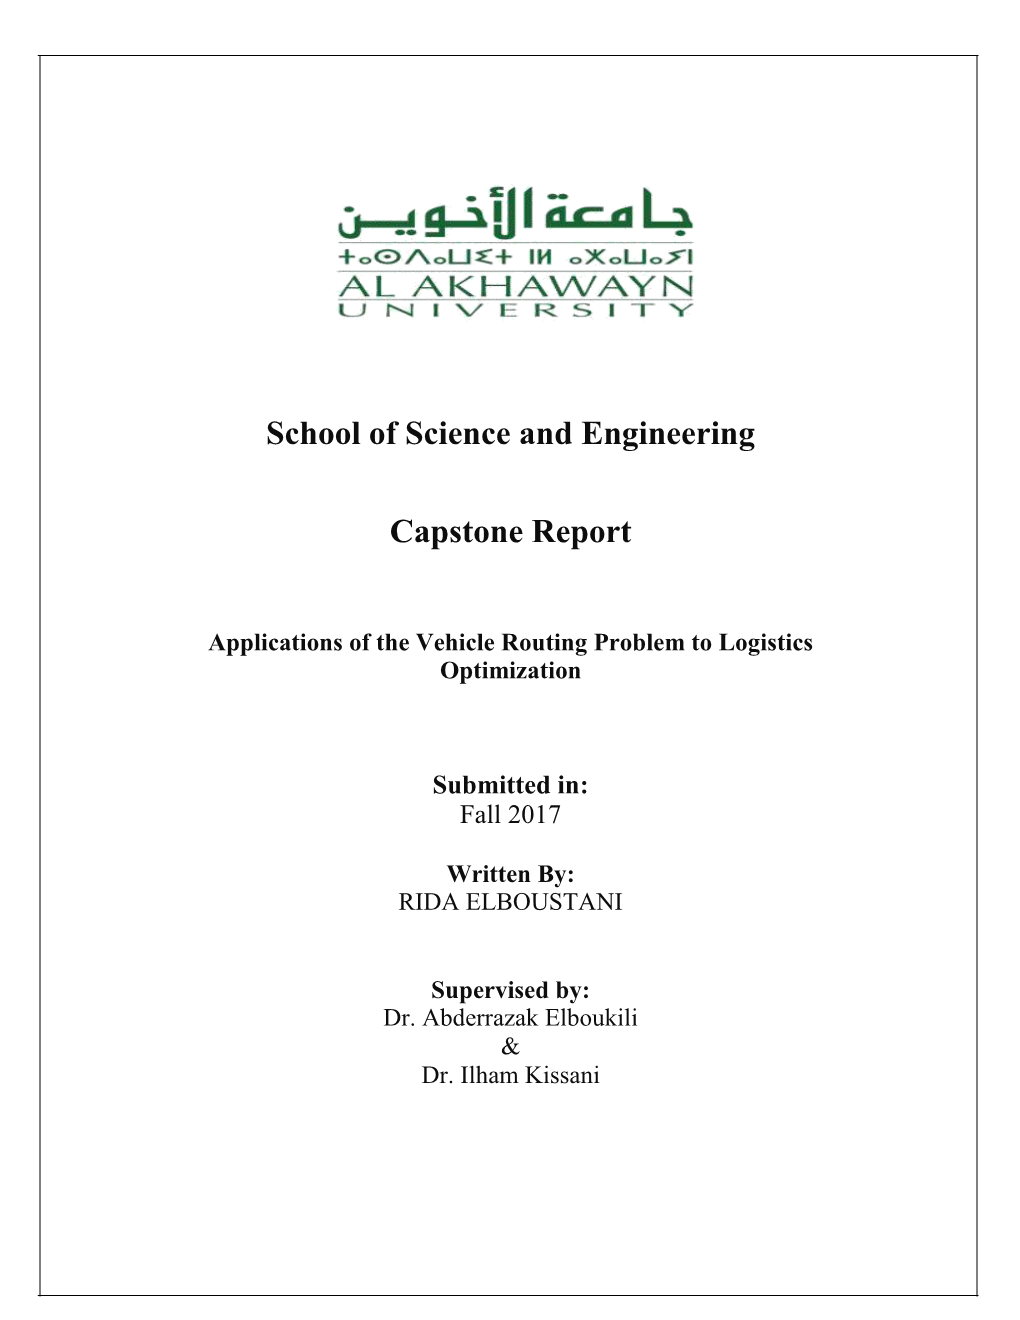 School of Science and Engineering Capstone Report